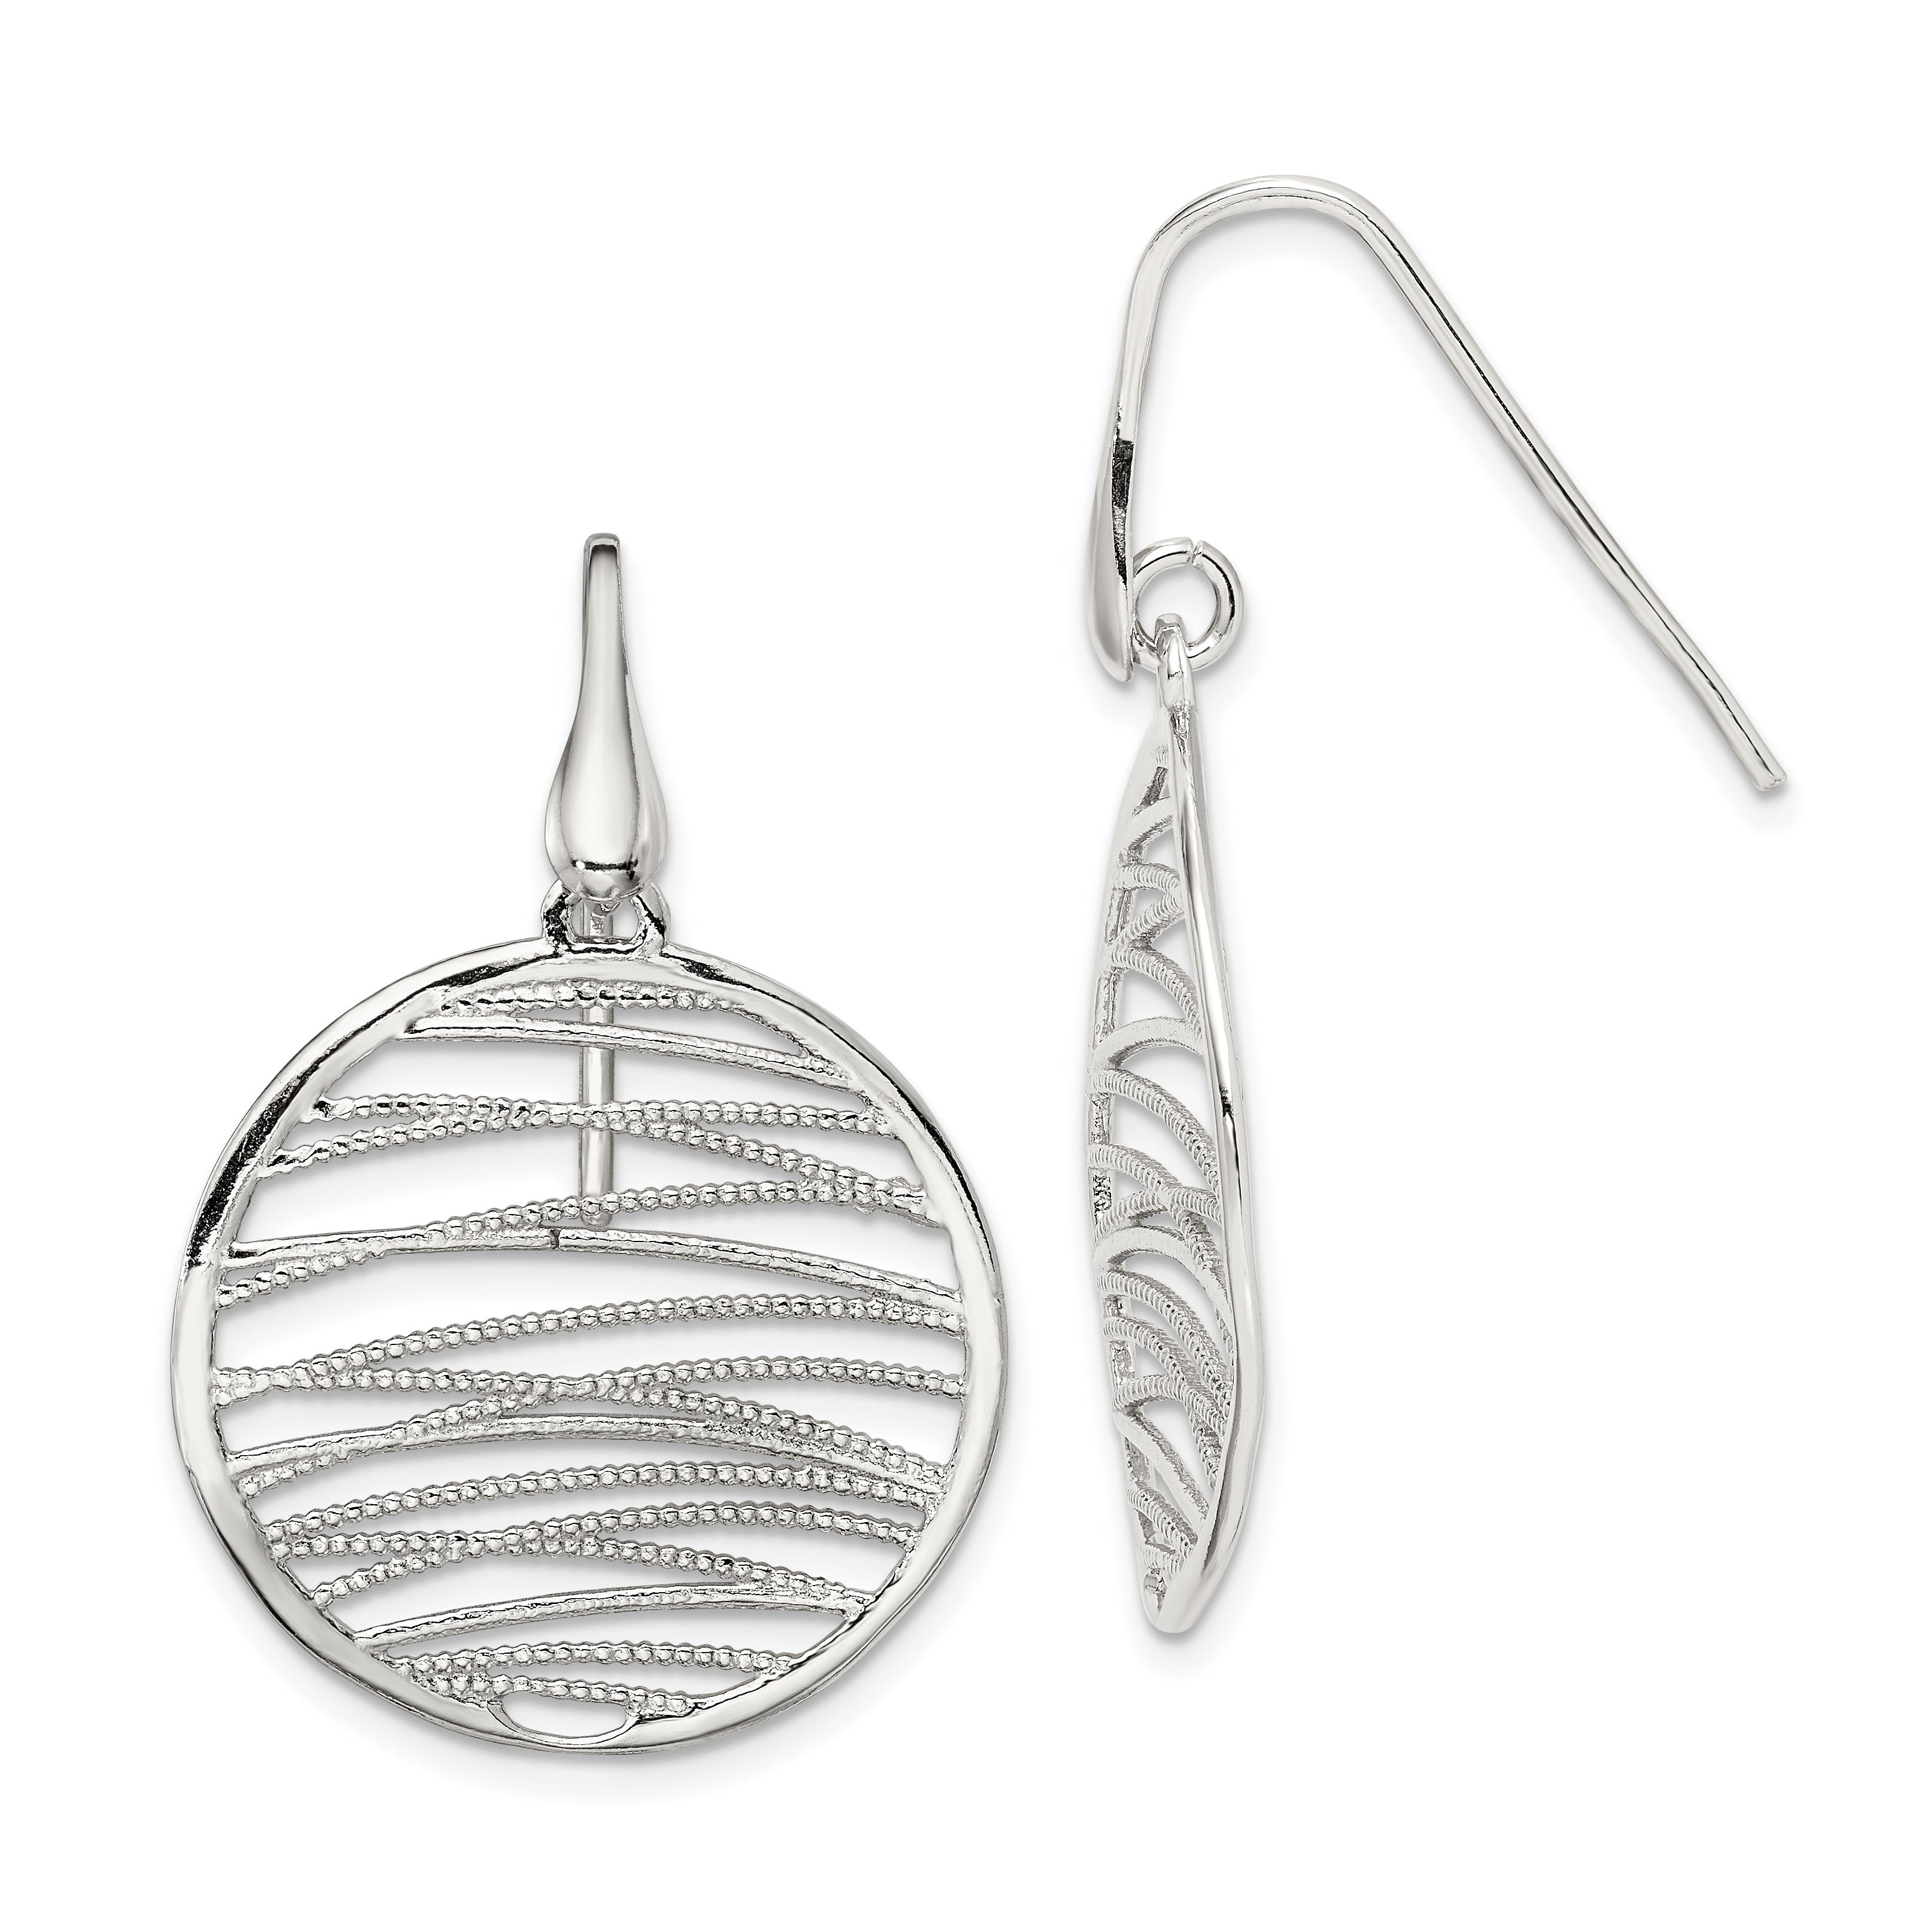 Sterling Silver Polished & Textured Earrings